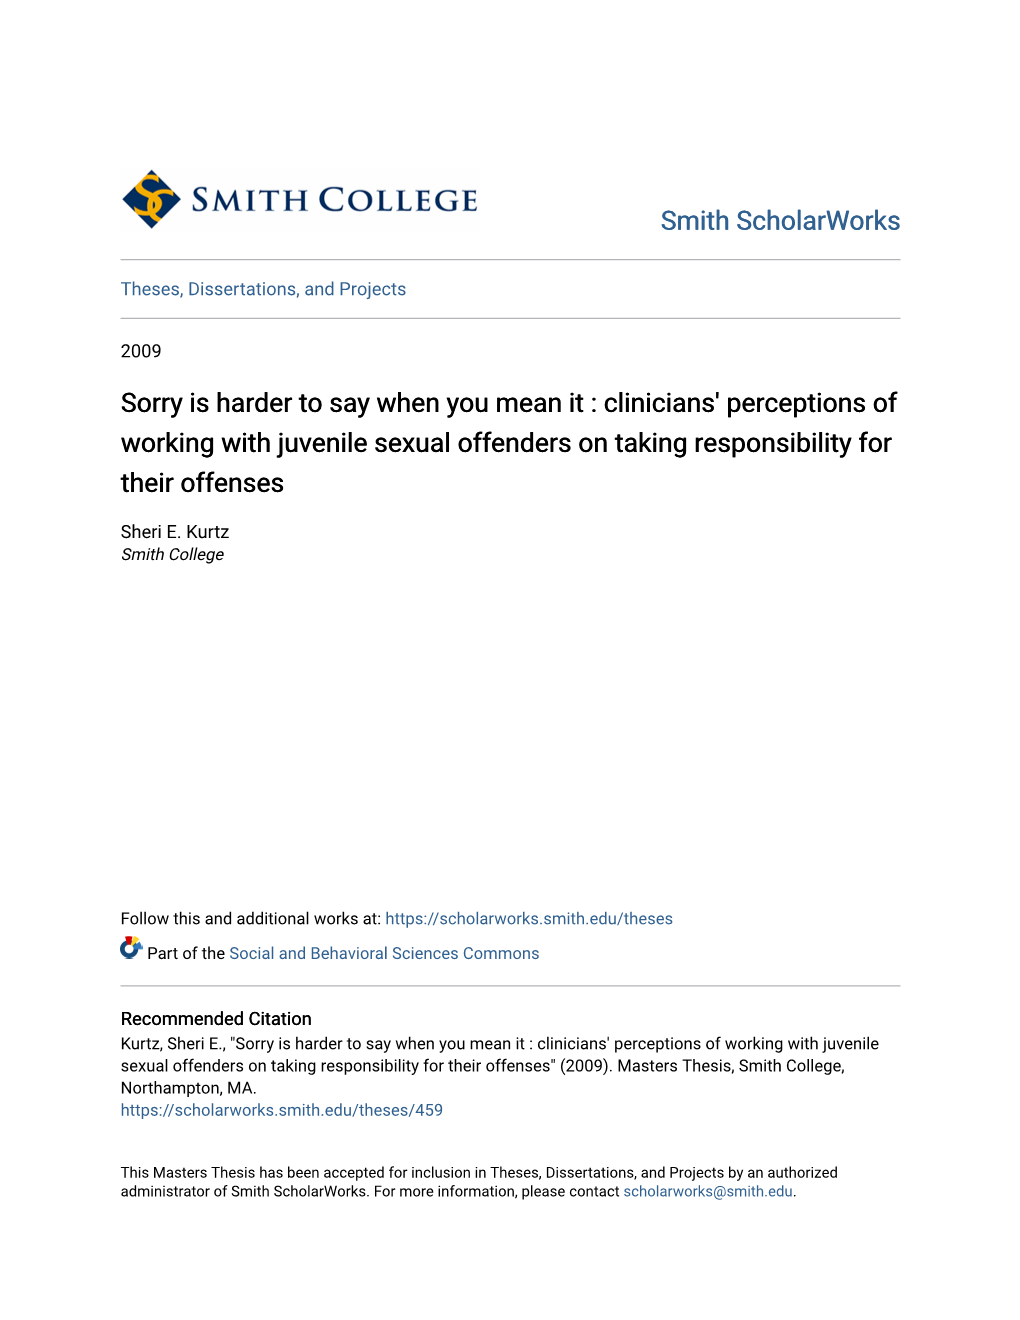 Sorry Is Harder to Say When You Mean It : Clinicians' Perceptions of Working with Juvenile Sexual Offenders on Taking Responsibility for Their Offenses